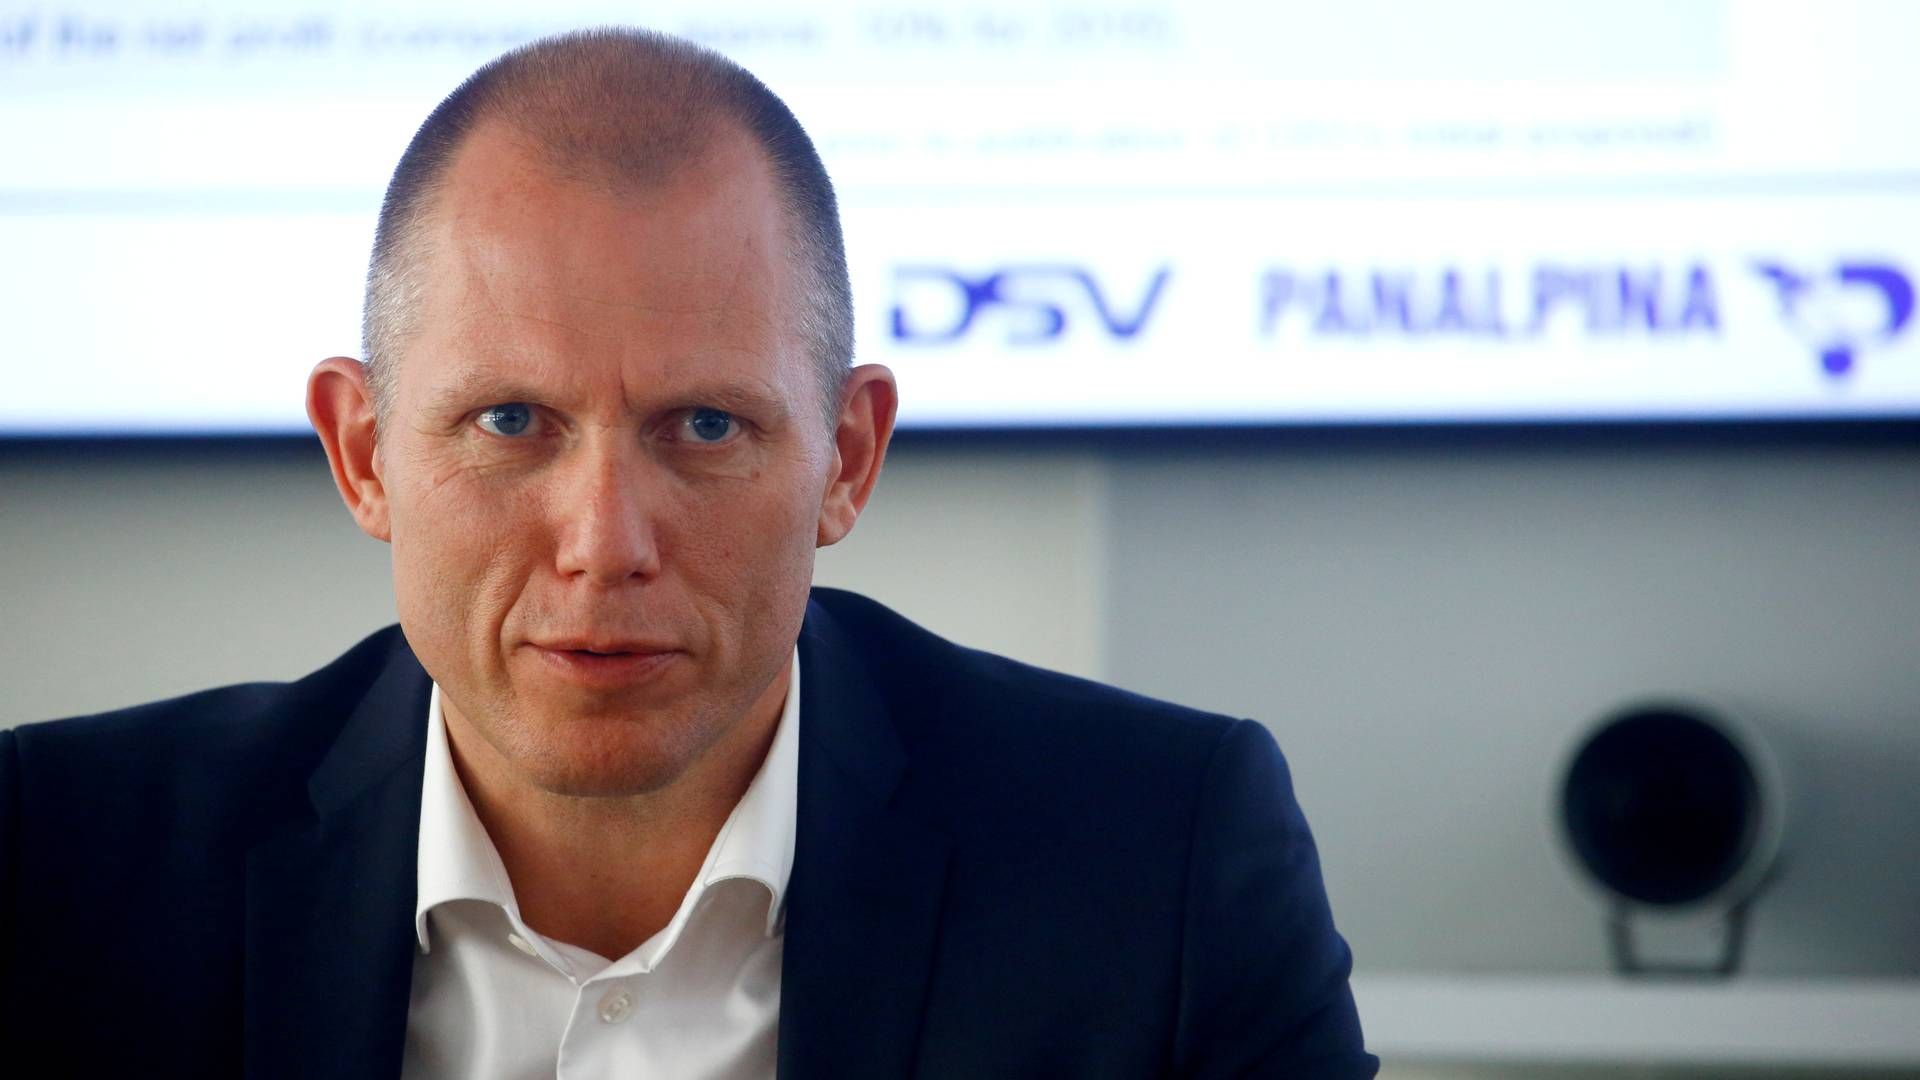 DSV and CEO Jens Bjørn Andersen acquired Agility GIL in 2021. As such, Agility became a major shareholder in DSV. Now, the Kuwait-based group is divesting shares | Photo: Arnd Wiegmann/Reuters/Ritzau Scanpix